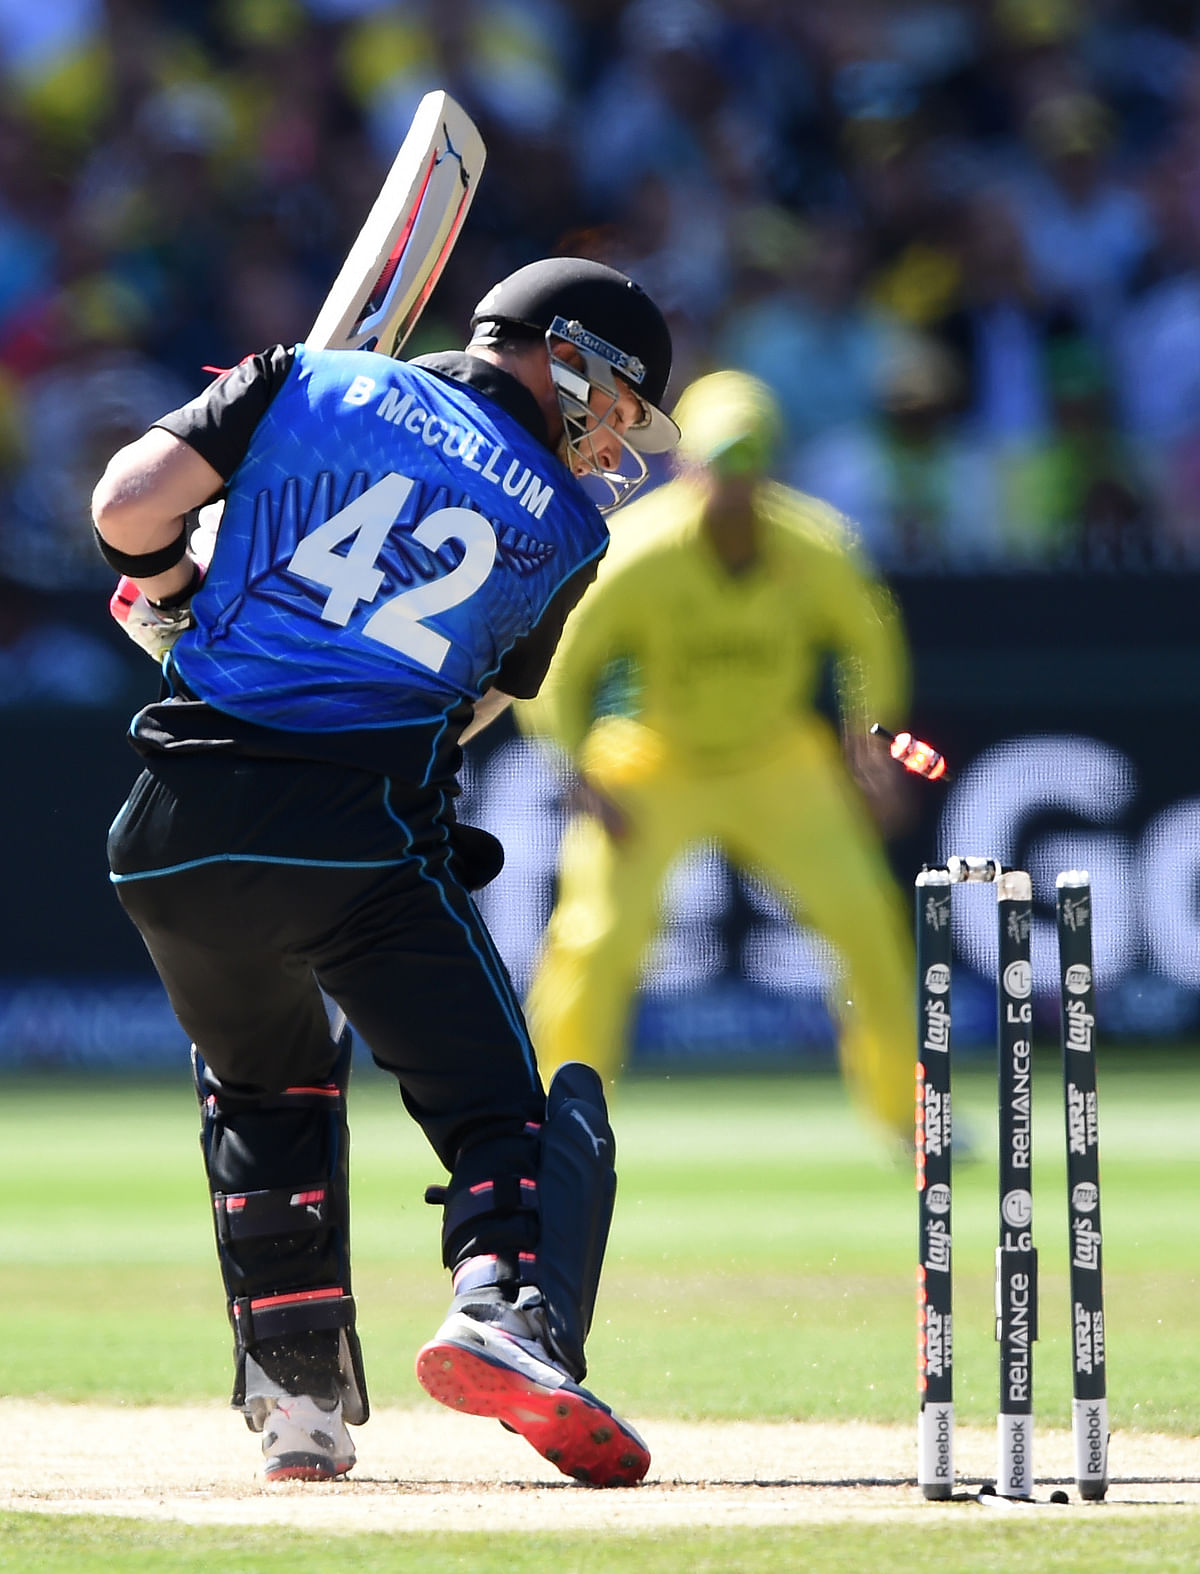 New Zealand are beaten by 7 wickets as Australia win the World Cup trophy for a fifth time in the sport’s history.